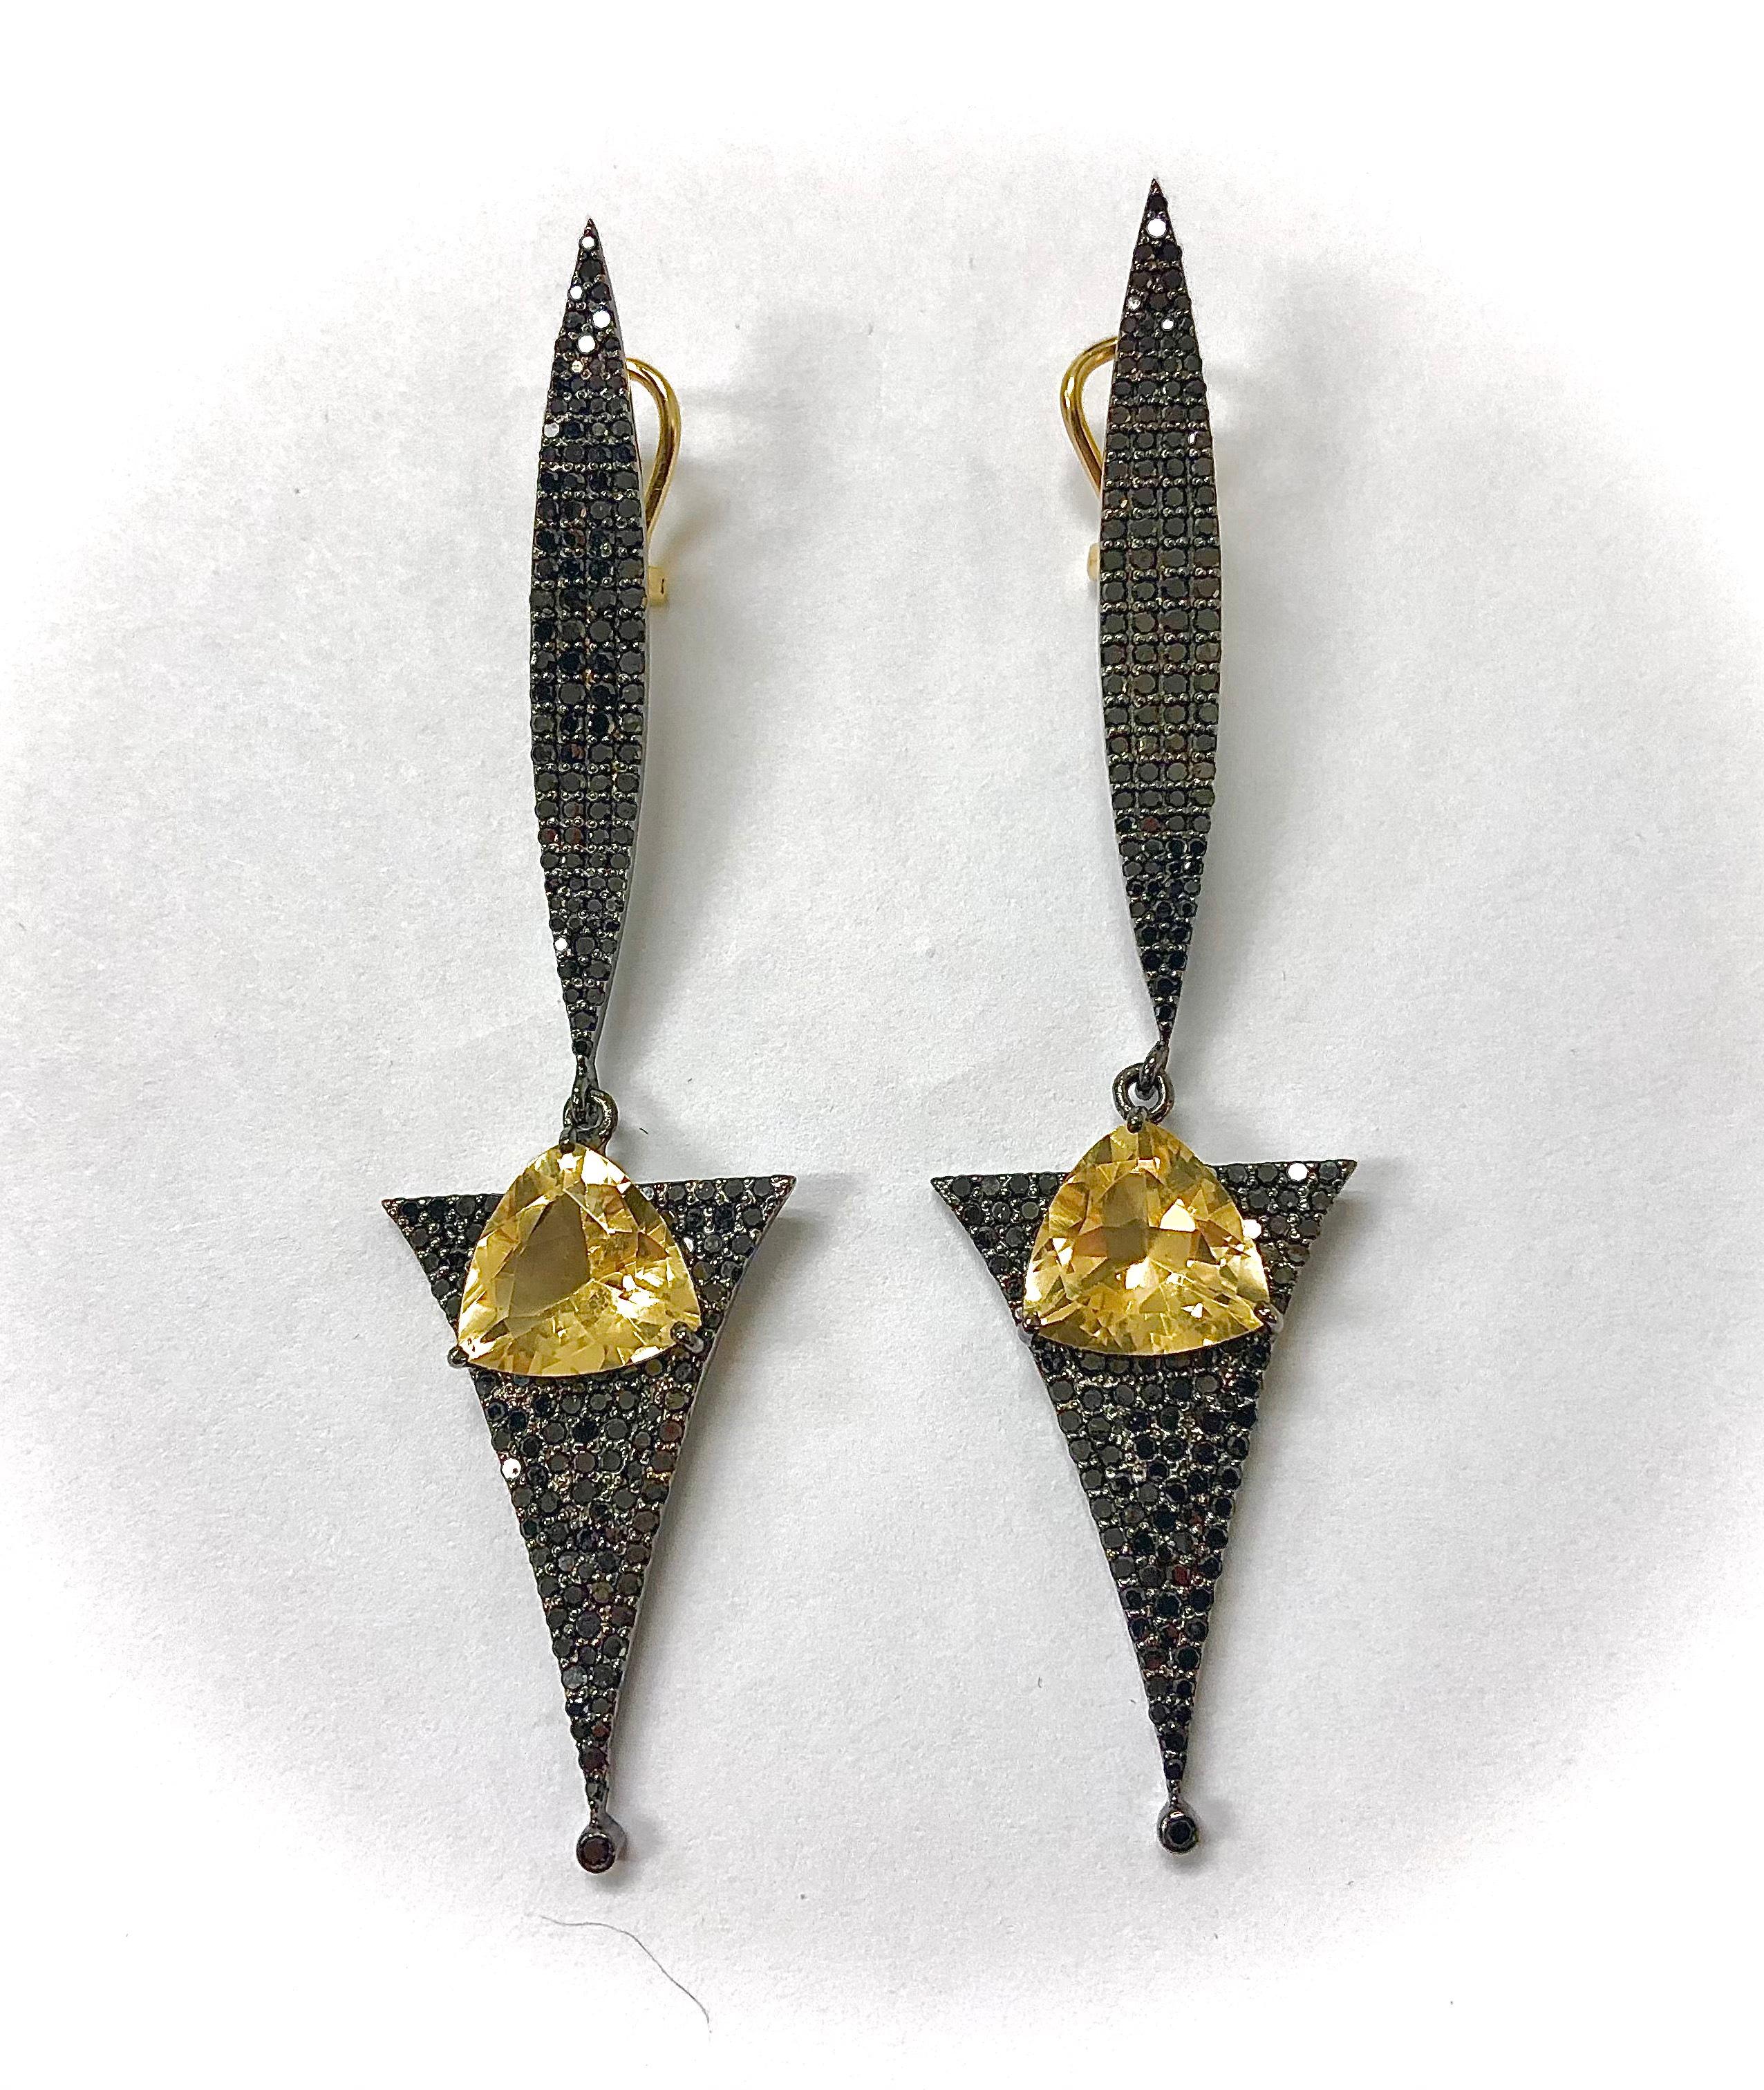 Description
Very dramatic, geometric, elegantly edgy earrings with Black Pave Diamonds and Citrine featuring easy to use Omega backs.
Item # E3296

Materials and Weight
Black pave diamonds, 2.98 carats.
Citrine, 12mm, trillion shape, 7 carats.
Posts